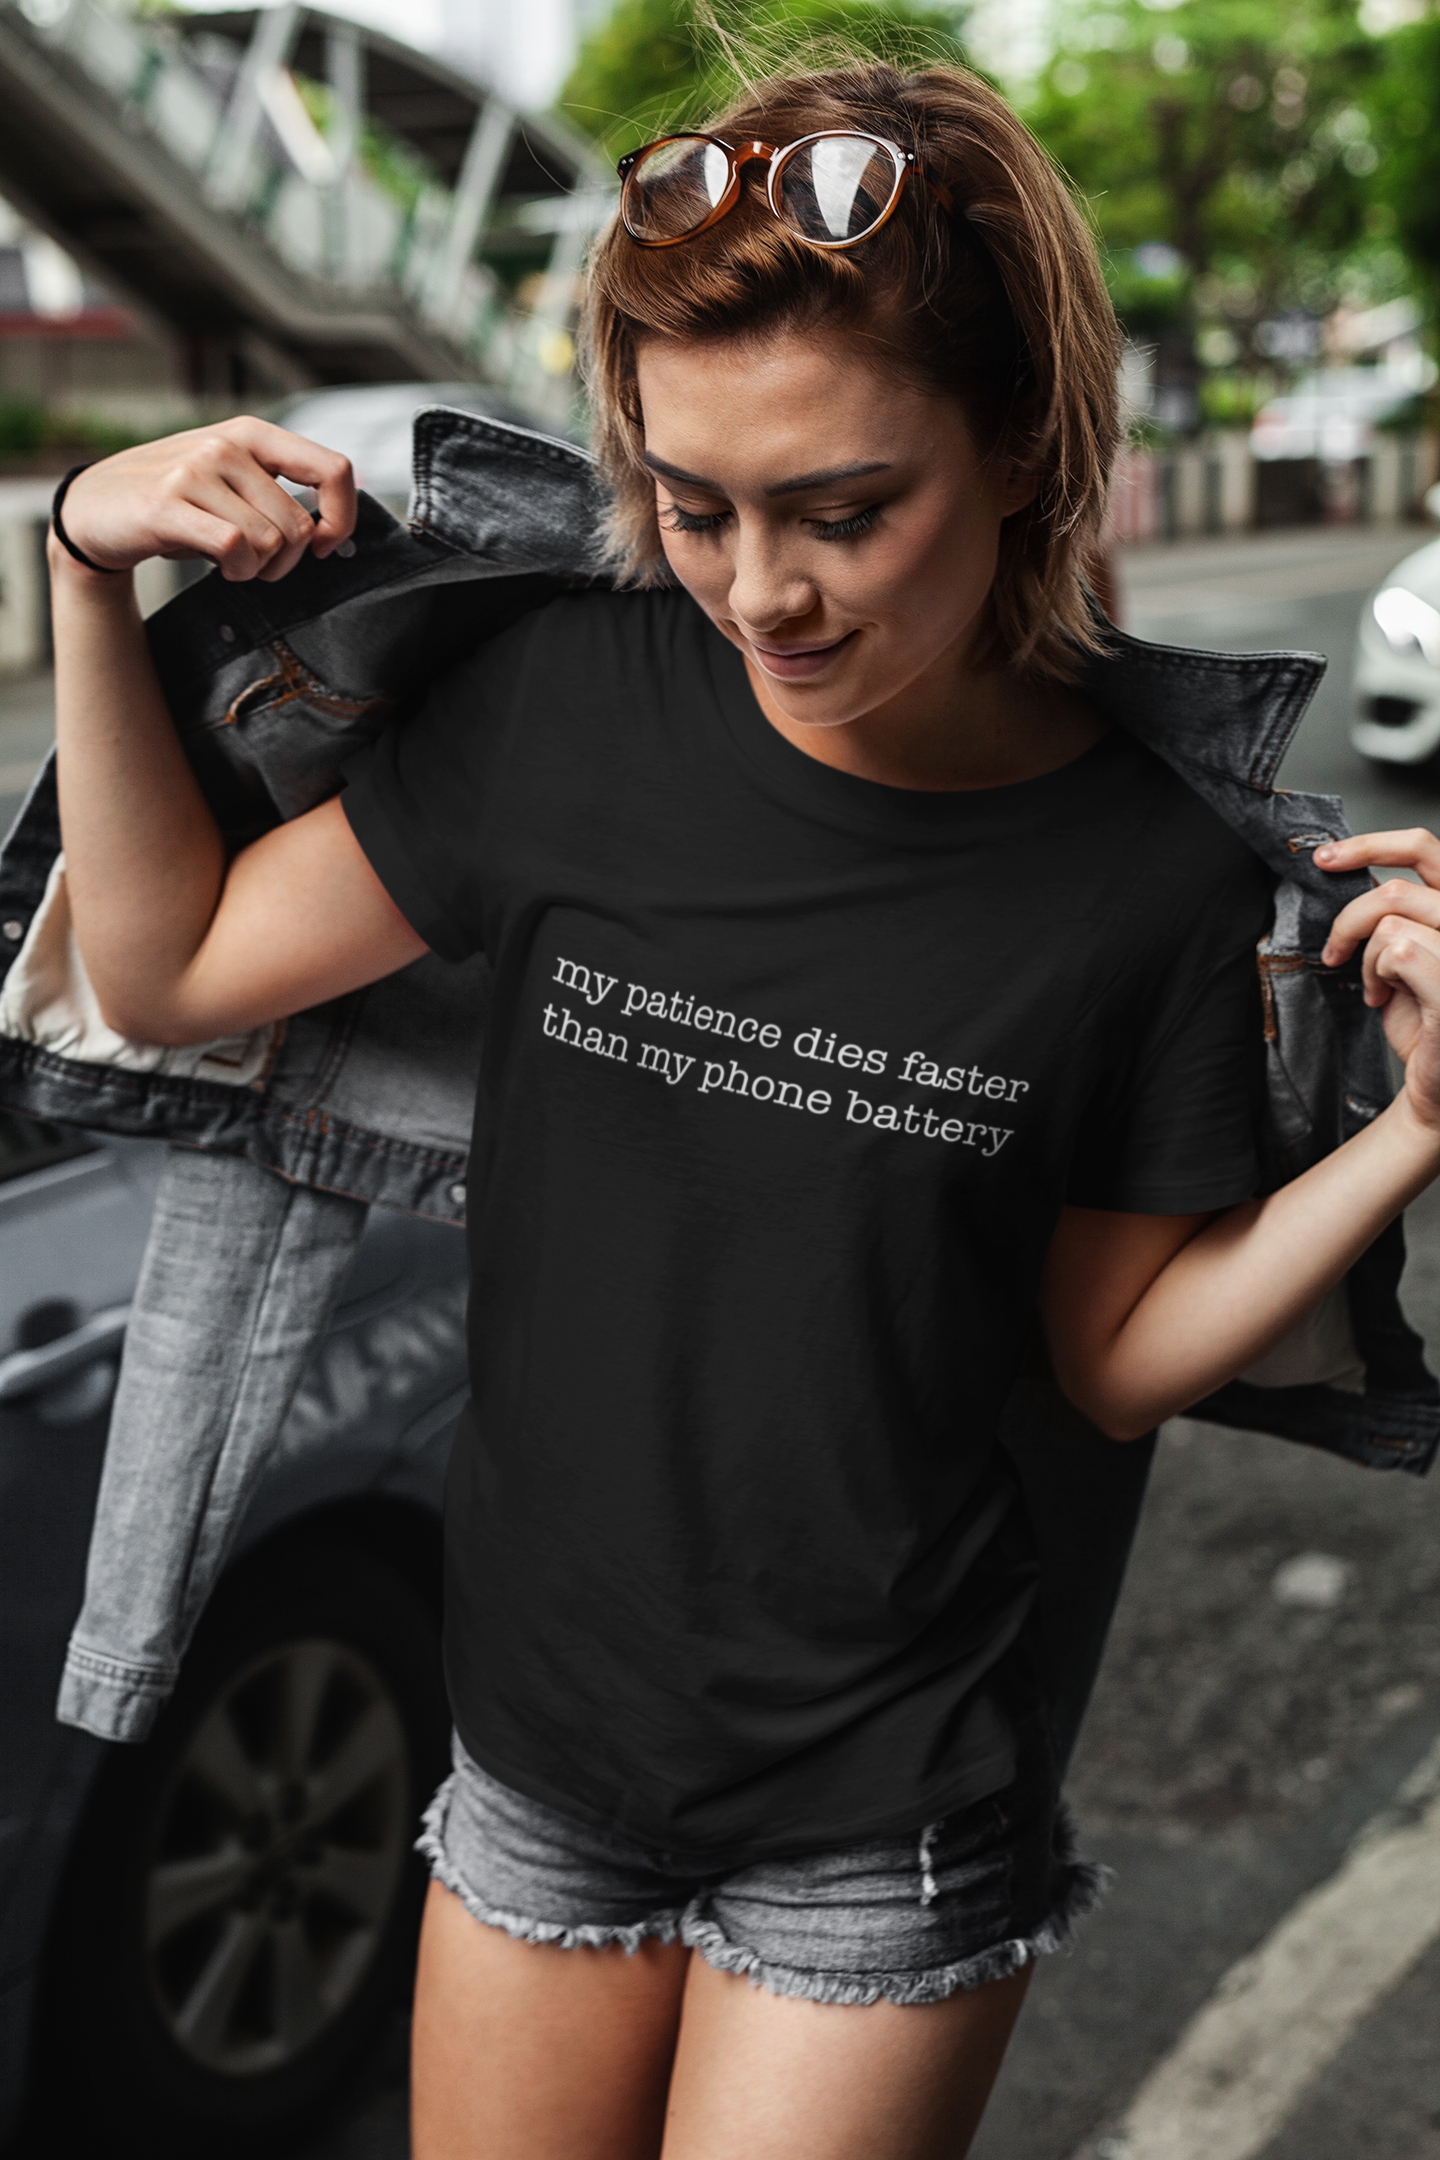 My Patience Dies Faster Than My Phone Battery T-shirt